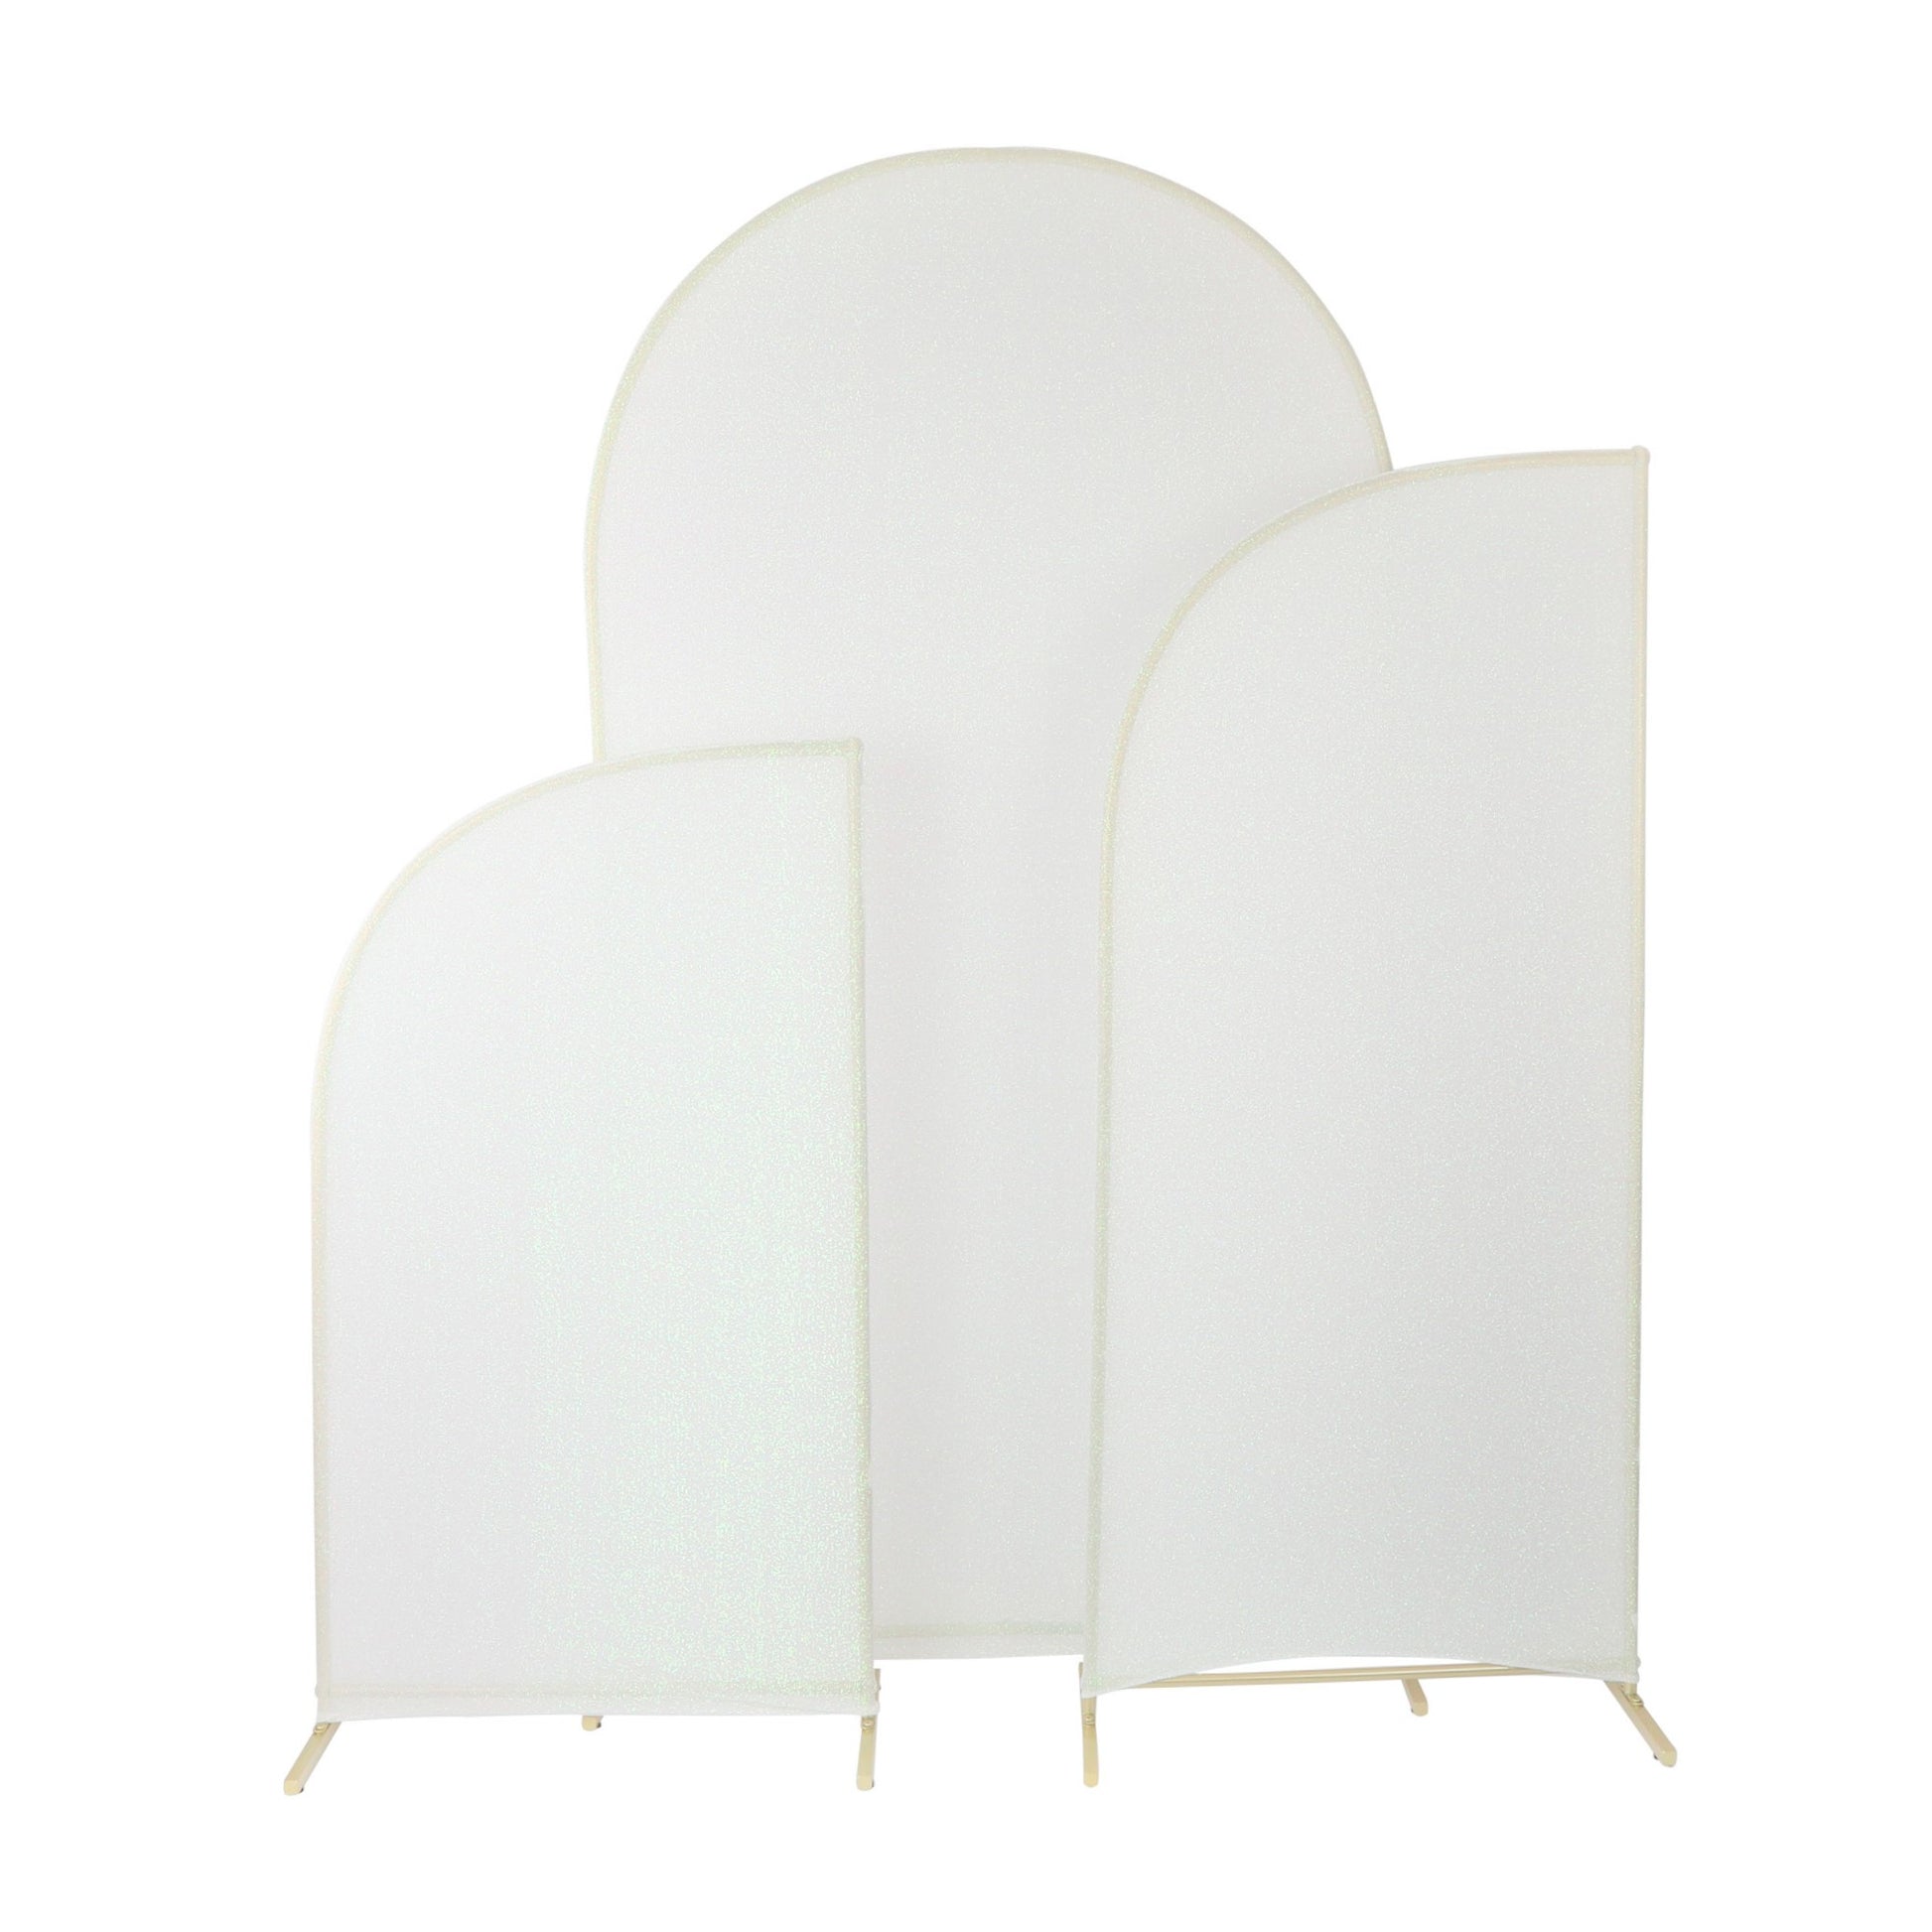 Shimmer Spandex Arch Covers for Chiara Frame Backdrop 3pc/set - Iridescent White